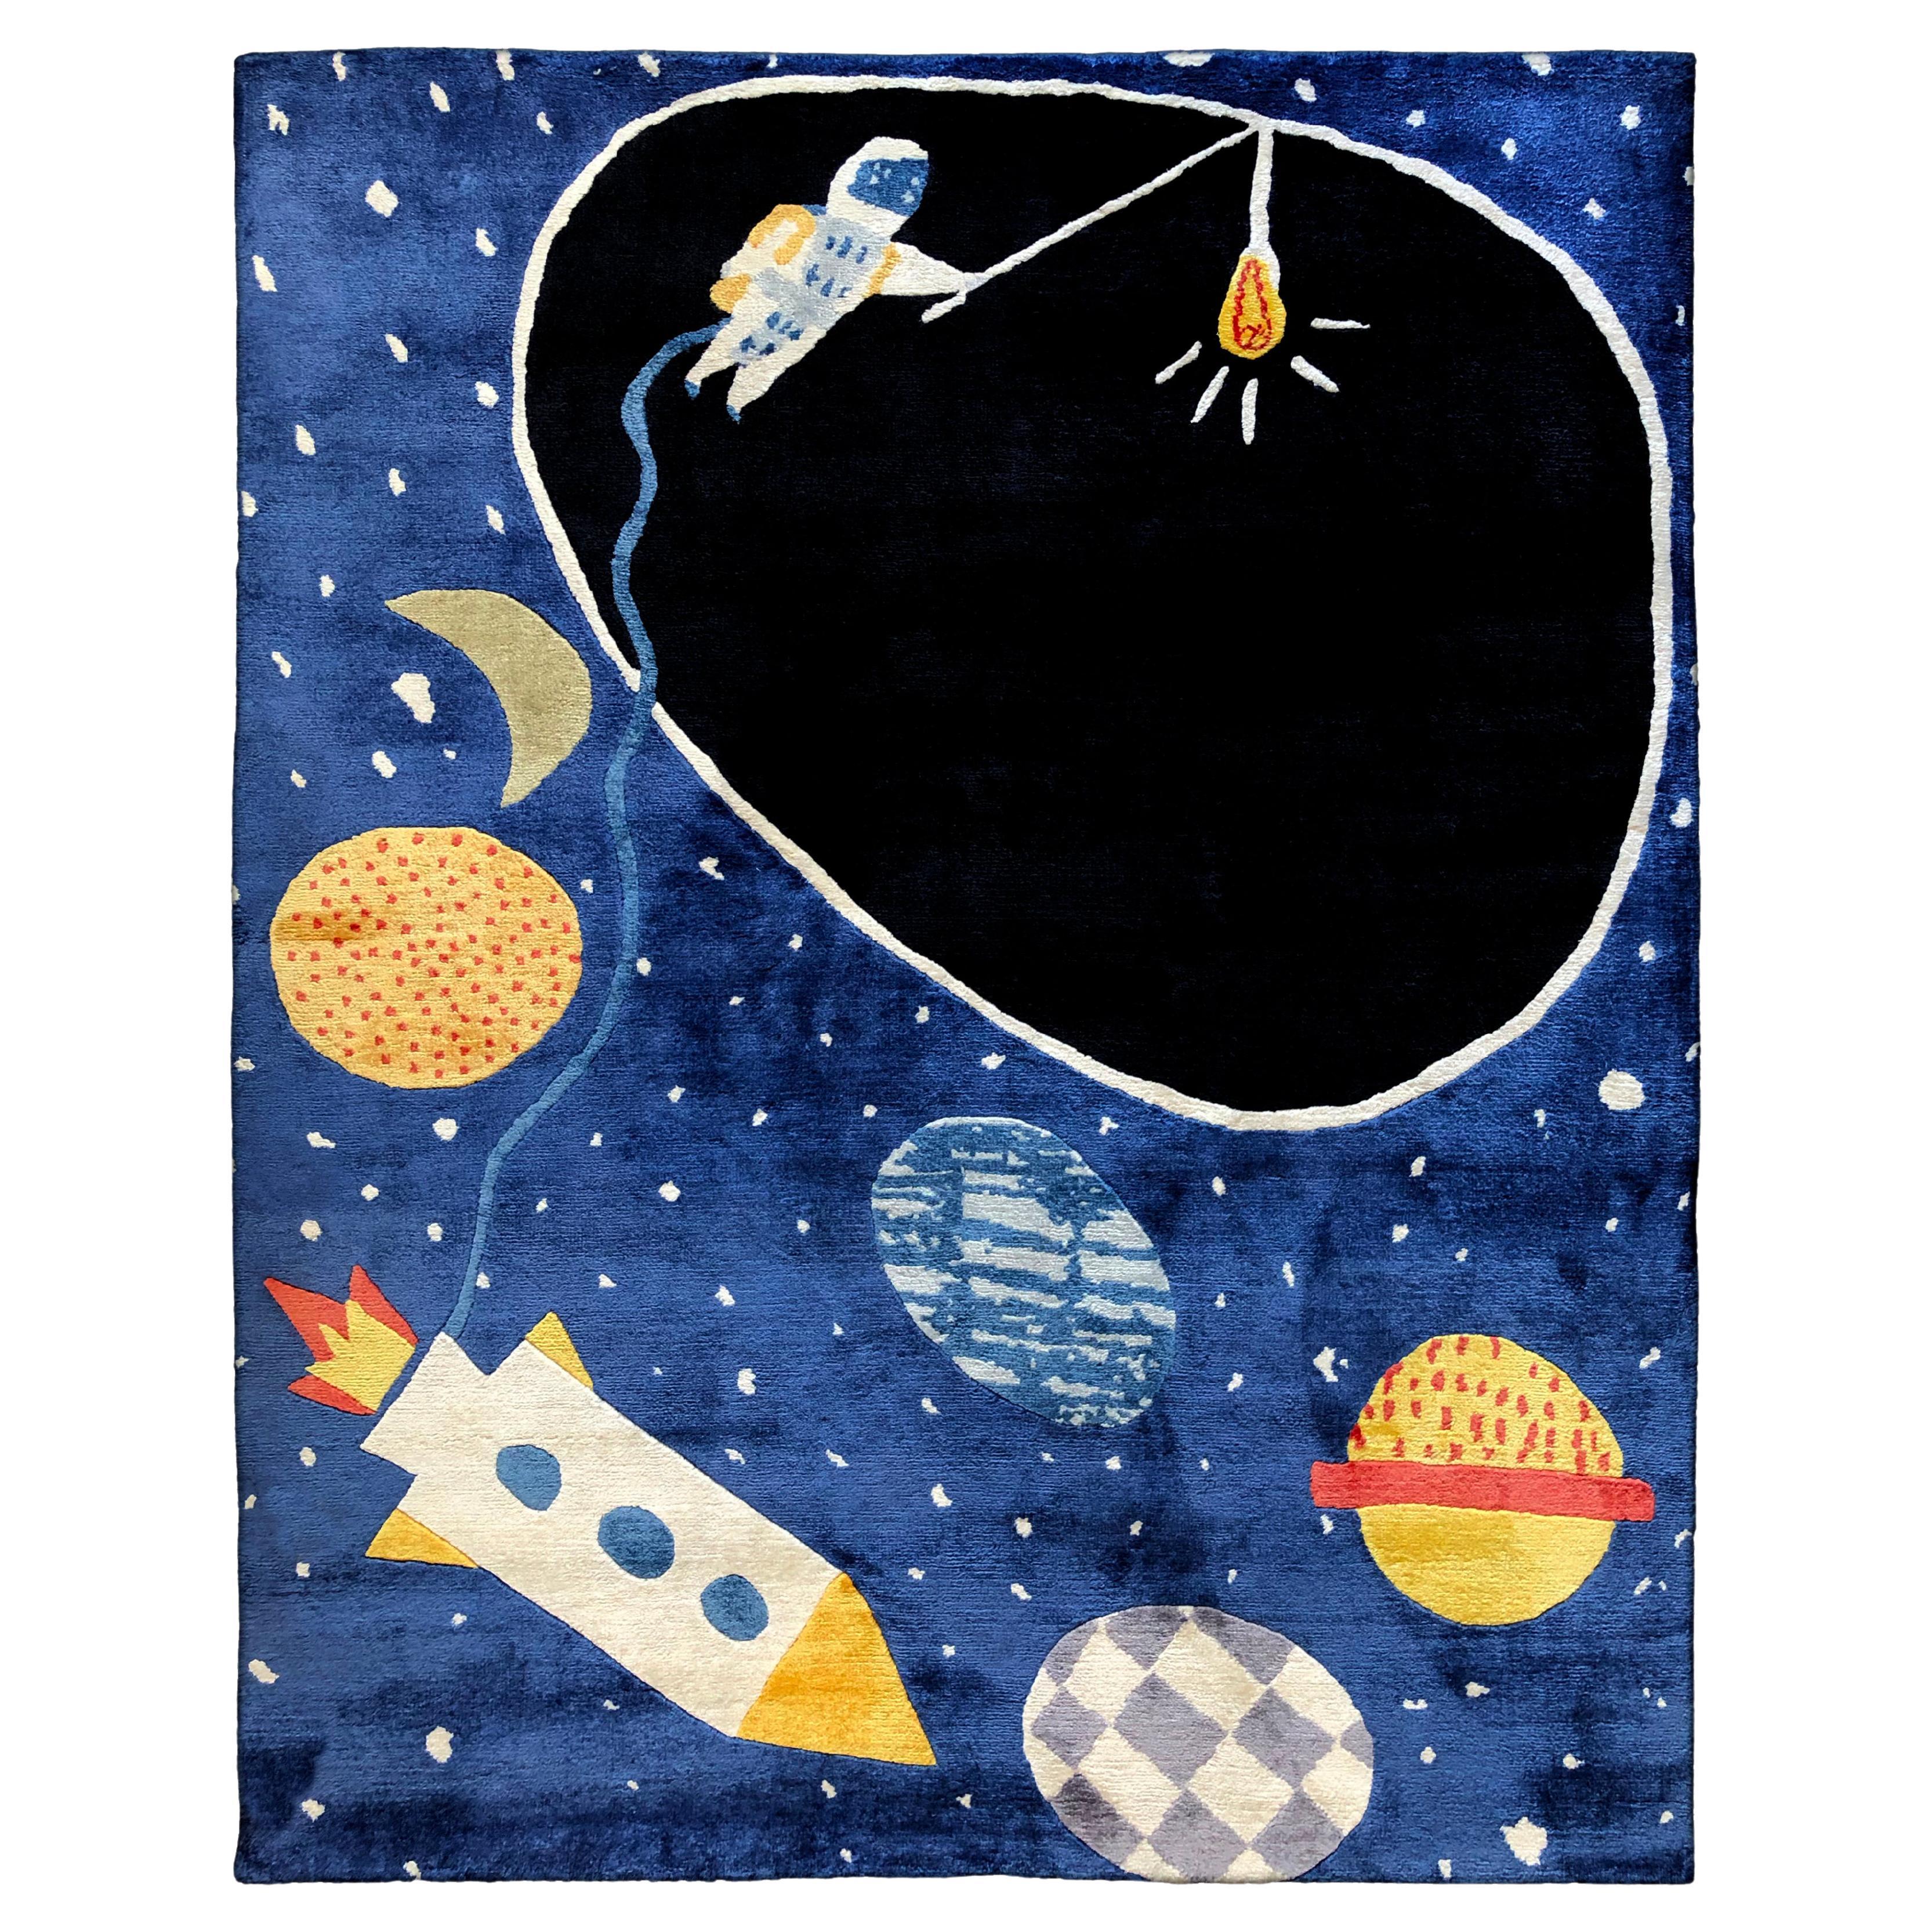 Space Ace Rug by Daria Solak, Hand Knotted, 100% New Zealand Wool 200x250cm For Sale